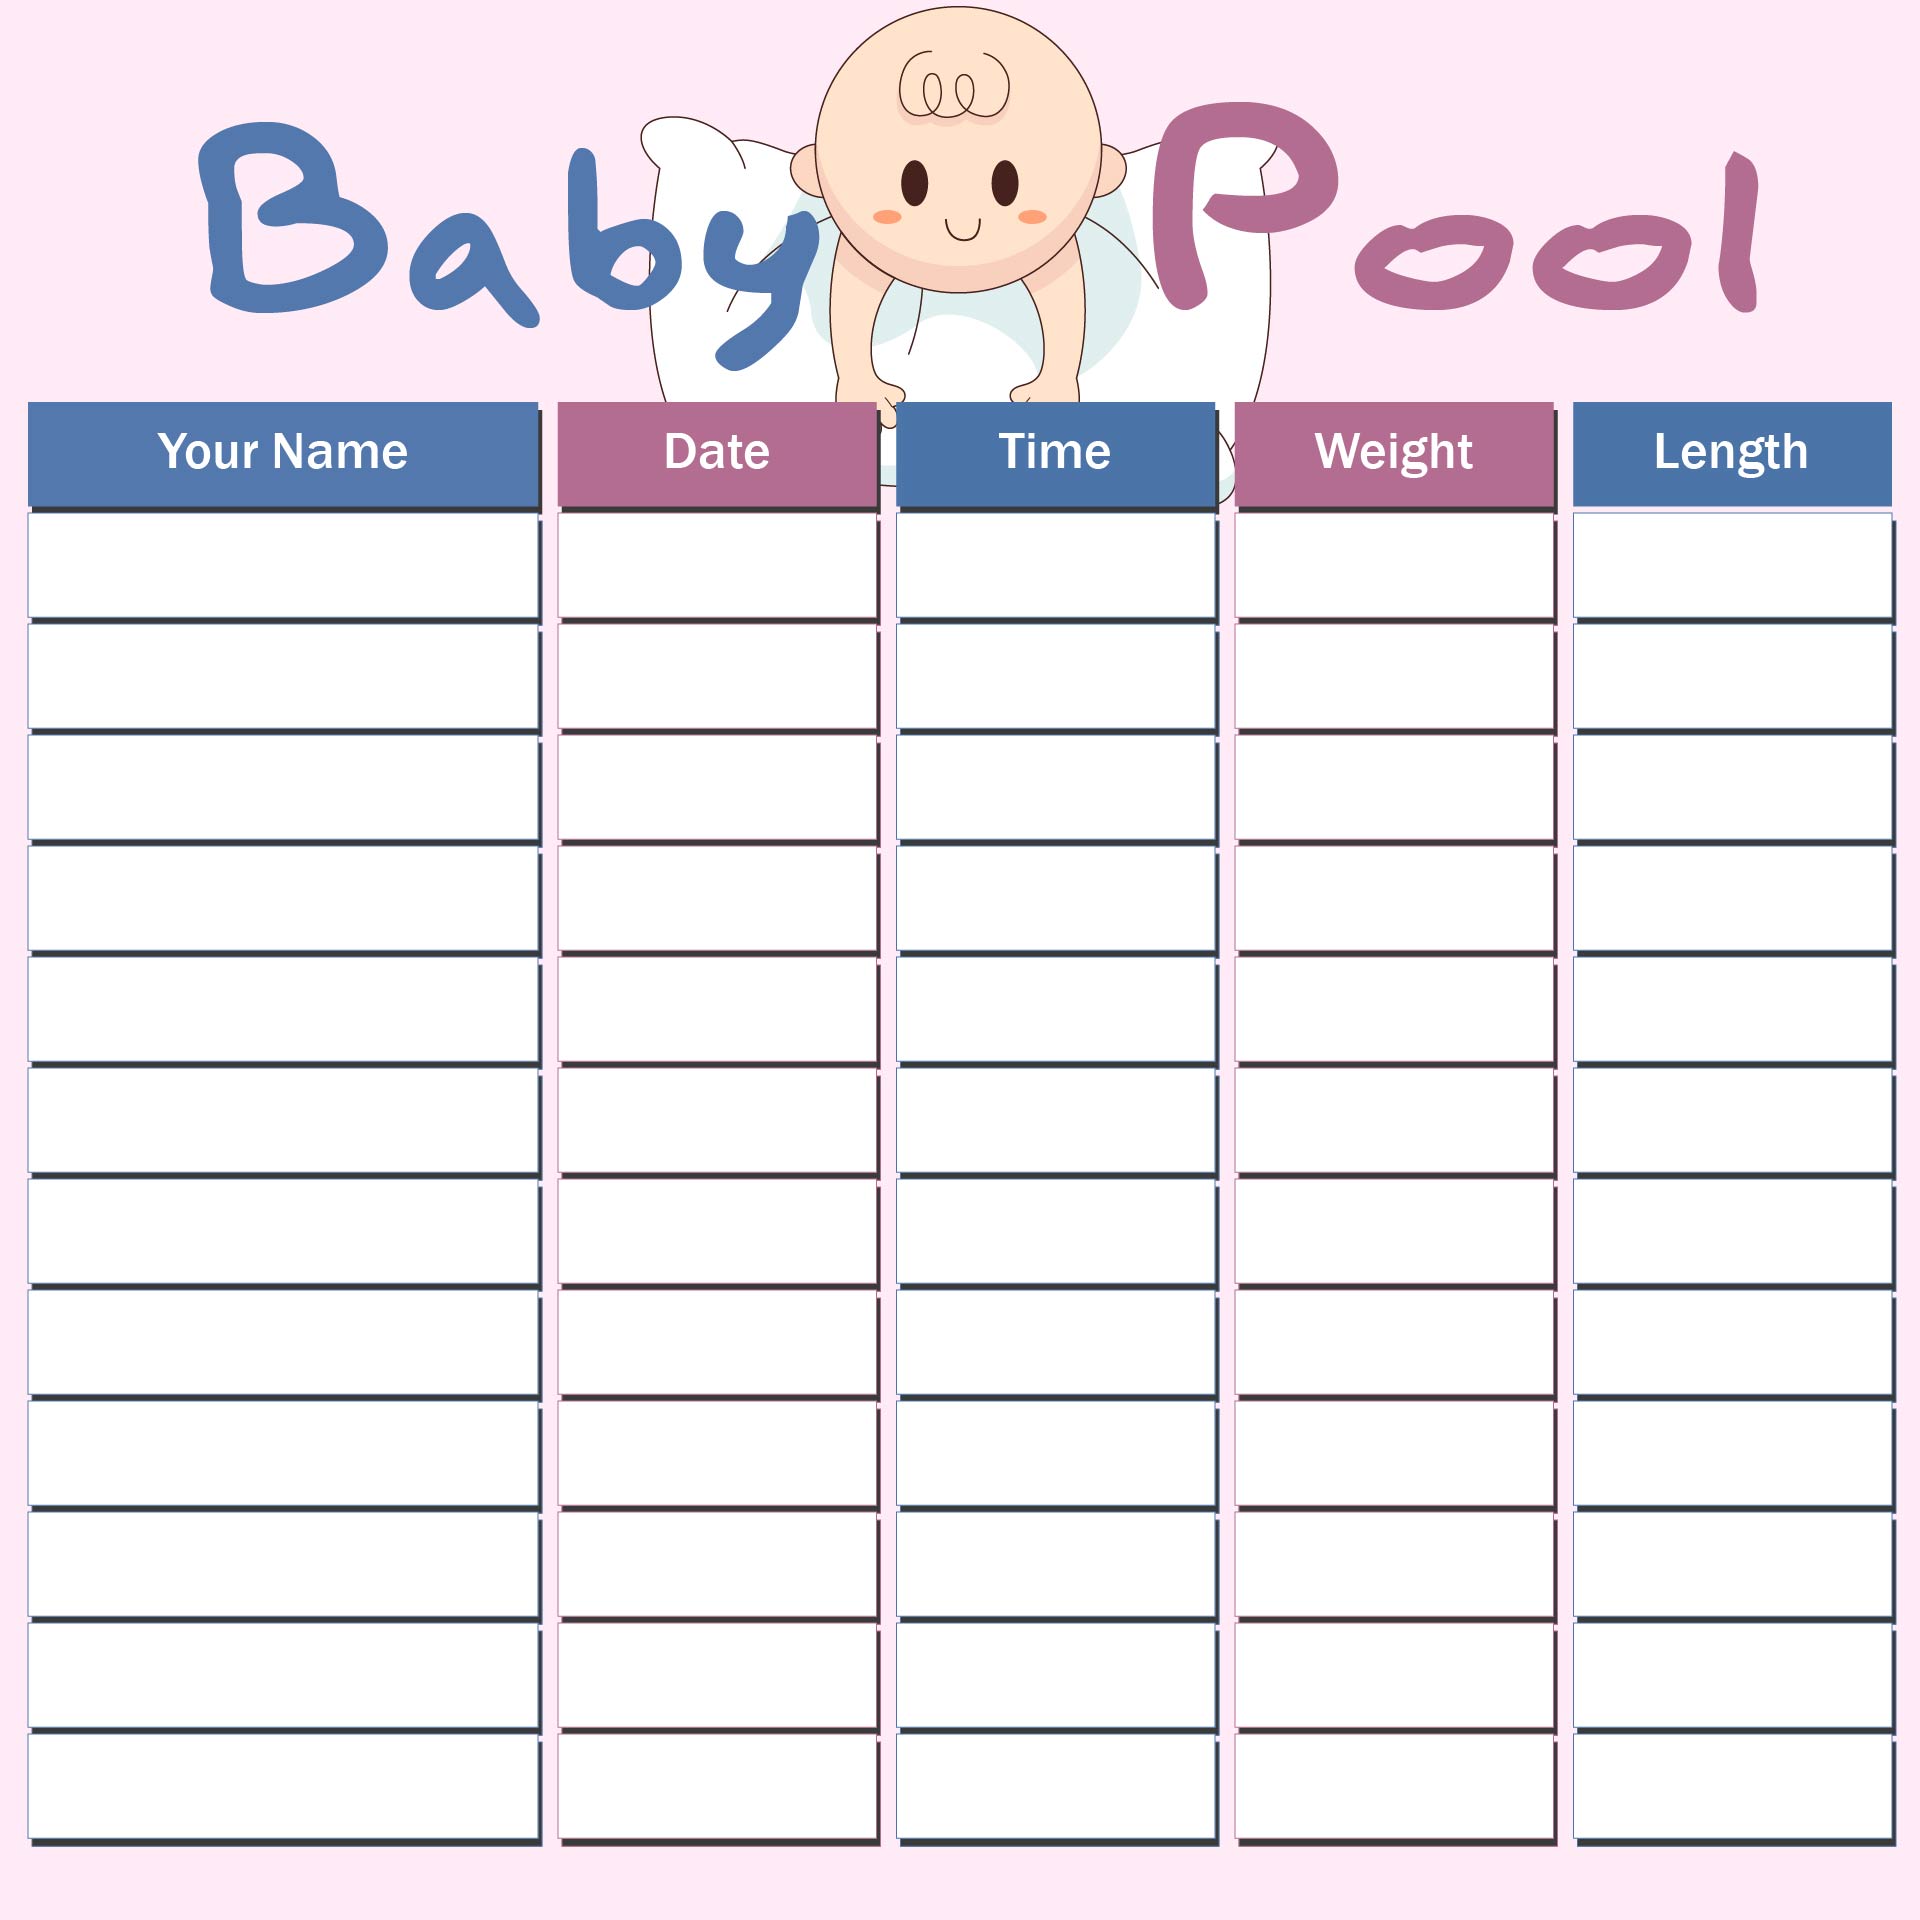 guess the date baby pool for baby shower 23